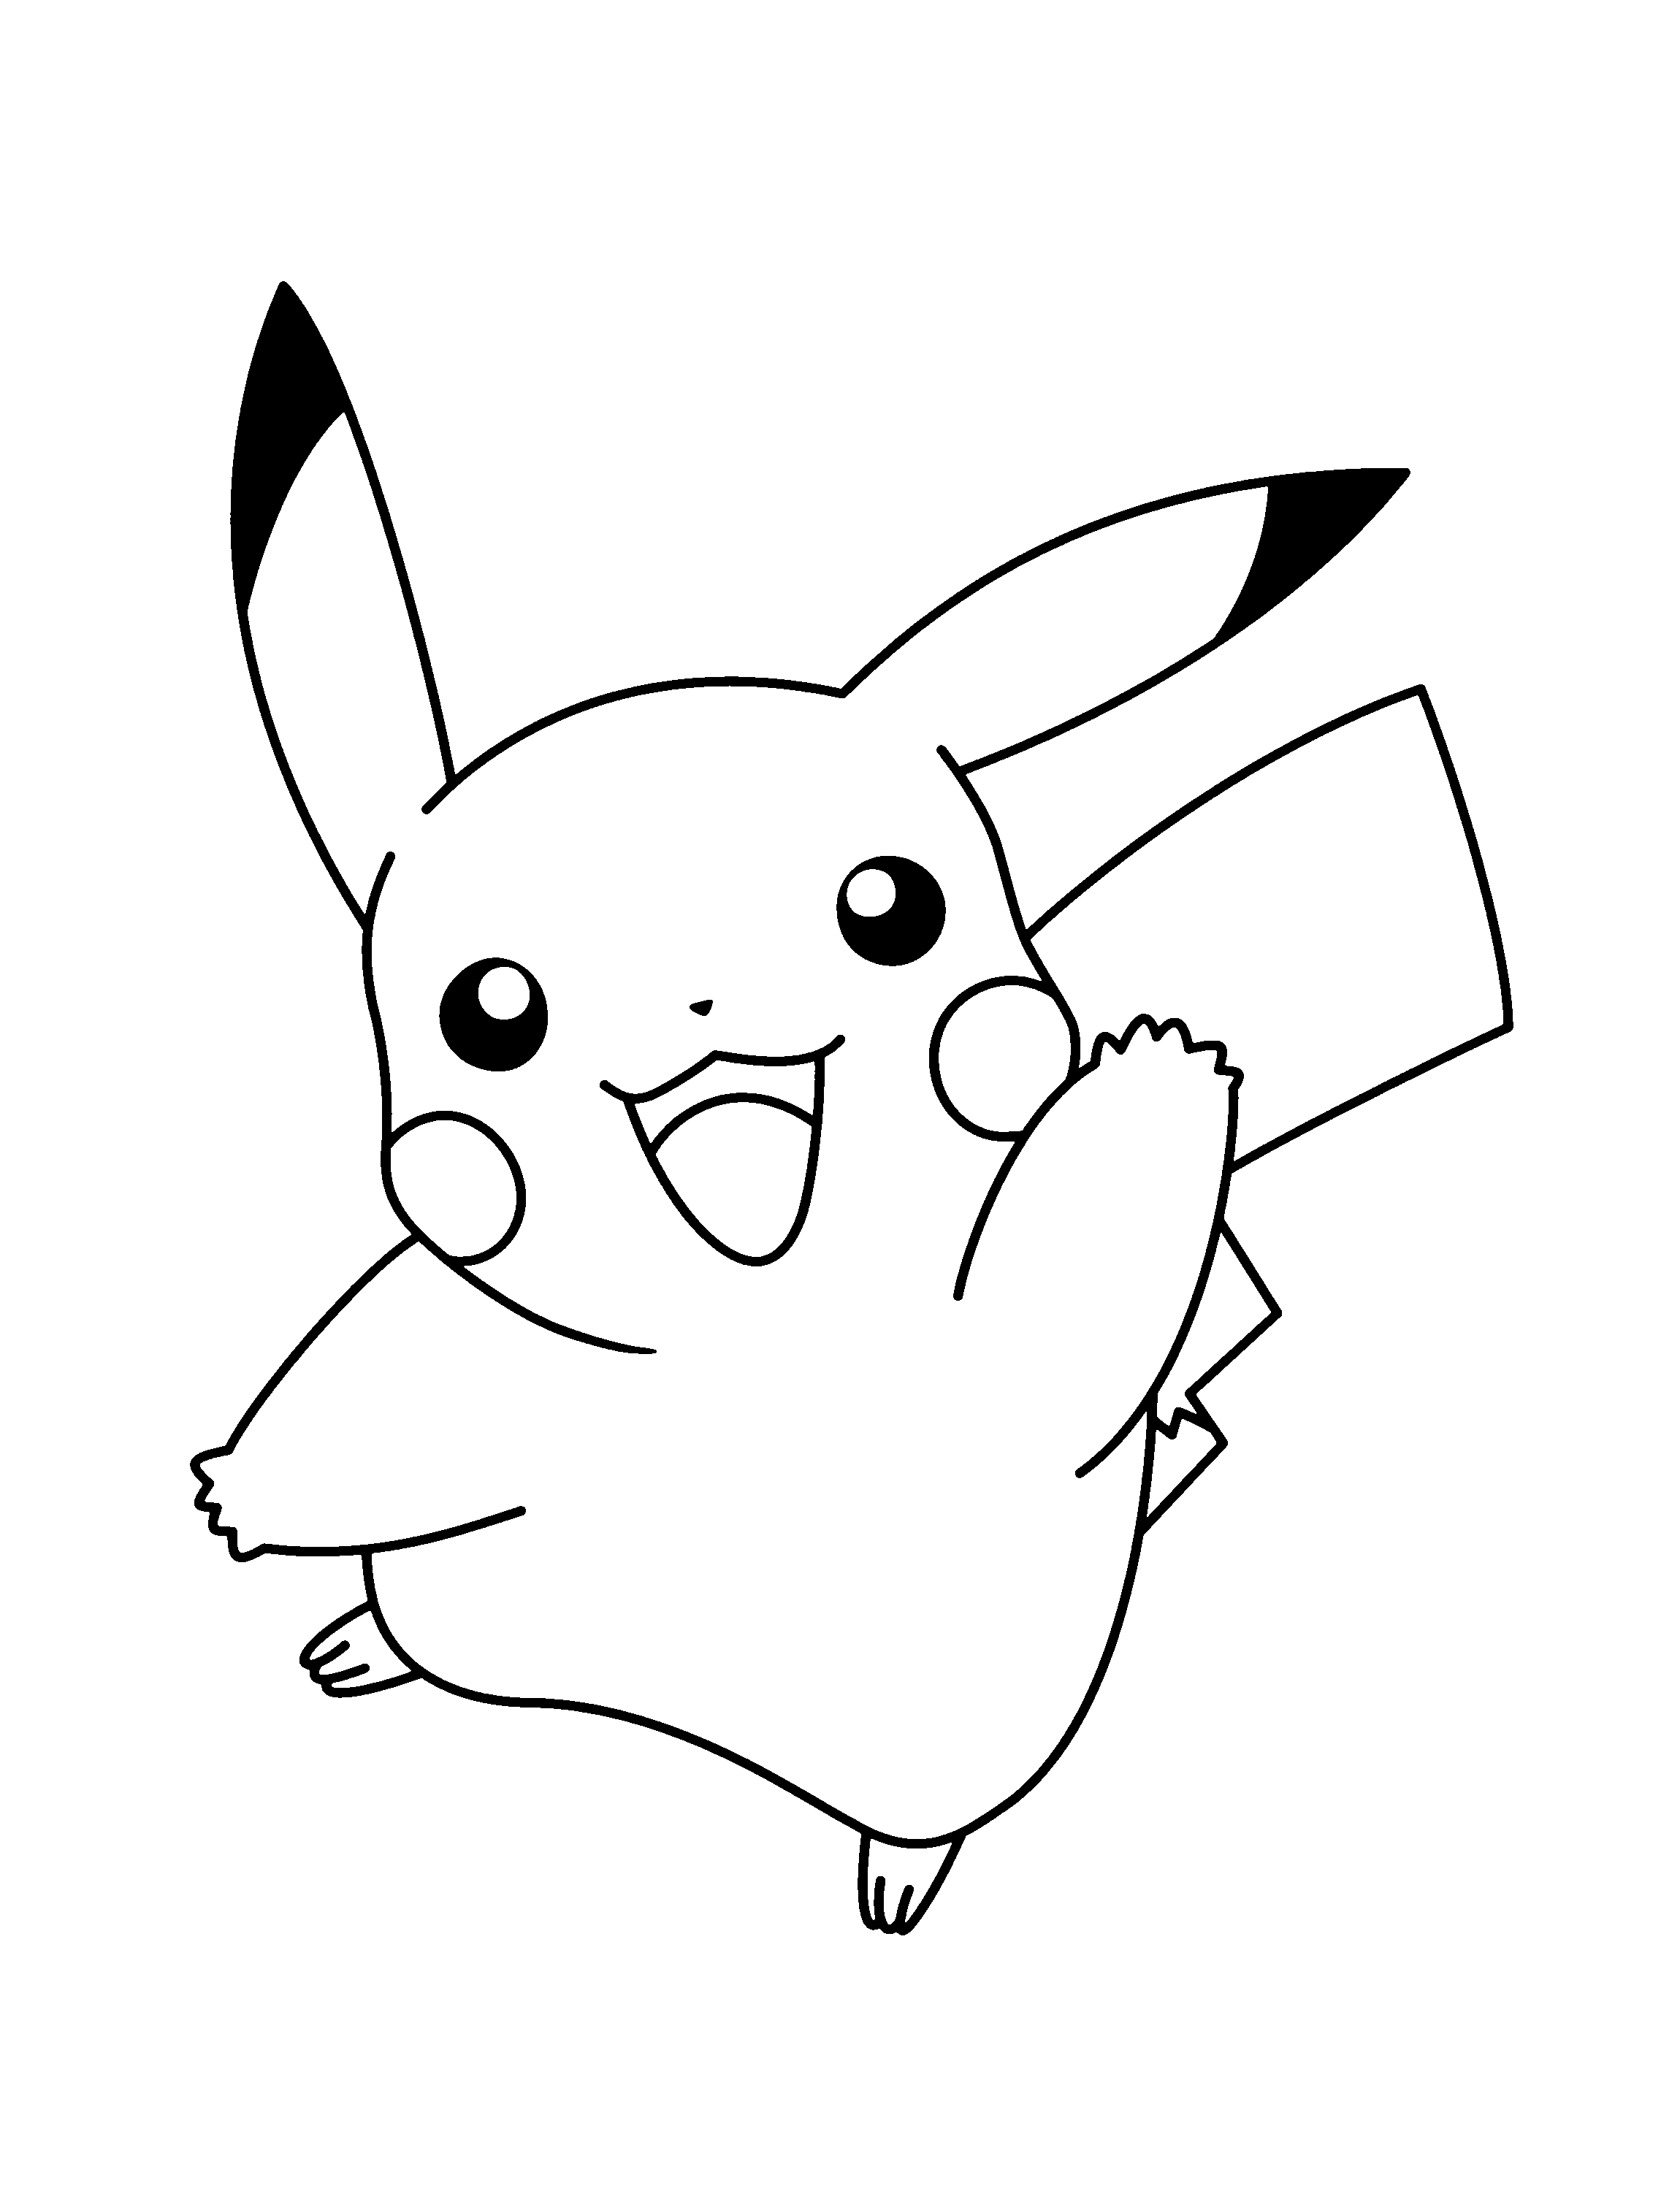 drawing pokemon 24614 cartoons printable coloring pages